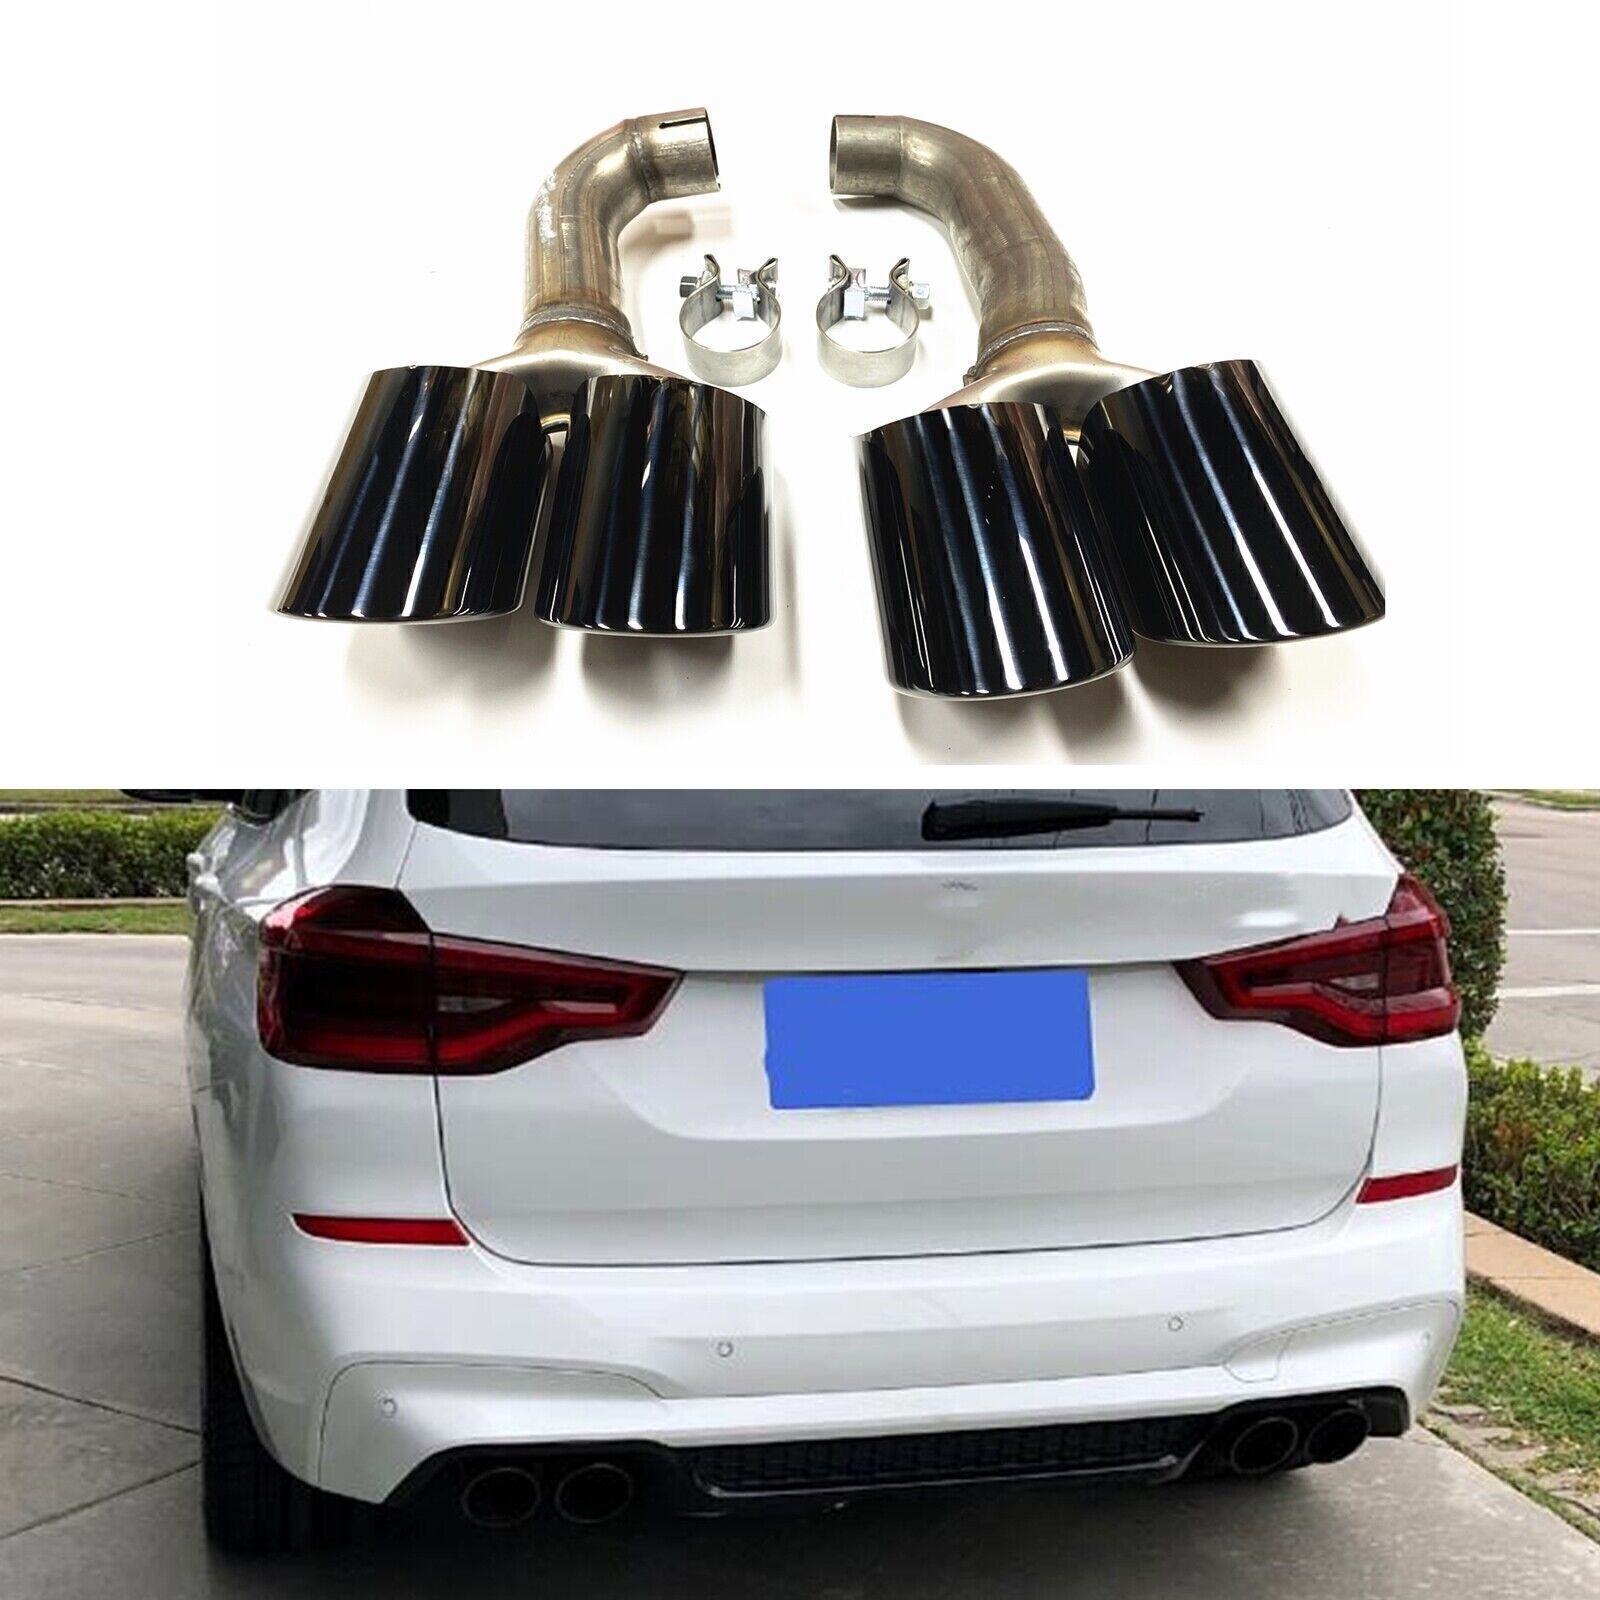 Rear Bumper Exhaust Tailpipes Tips Kit For BMW X3M X4M 2018-2020 Stainless Steel